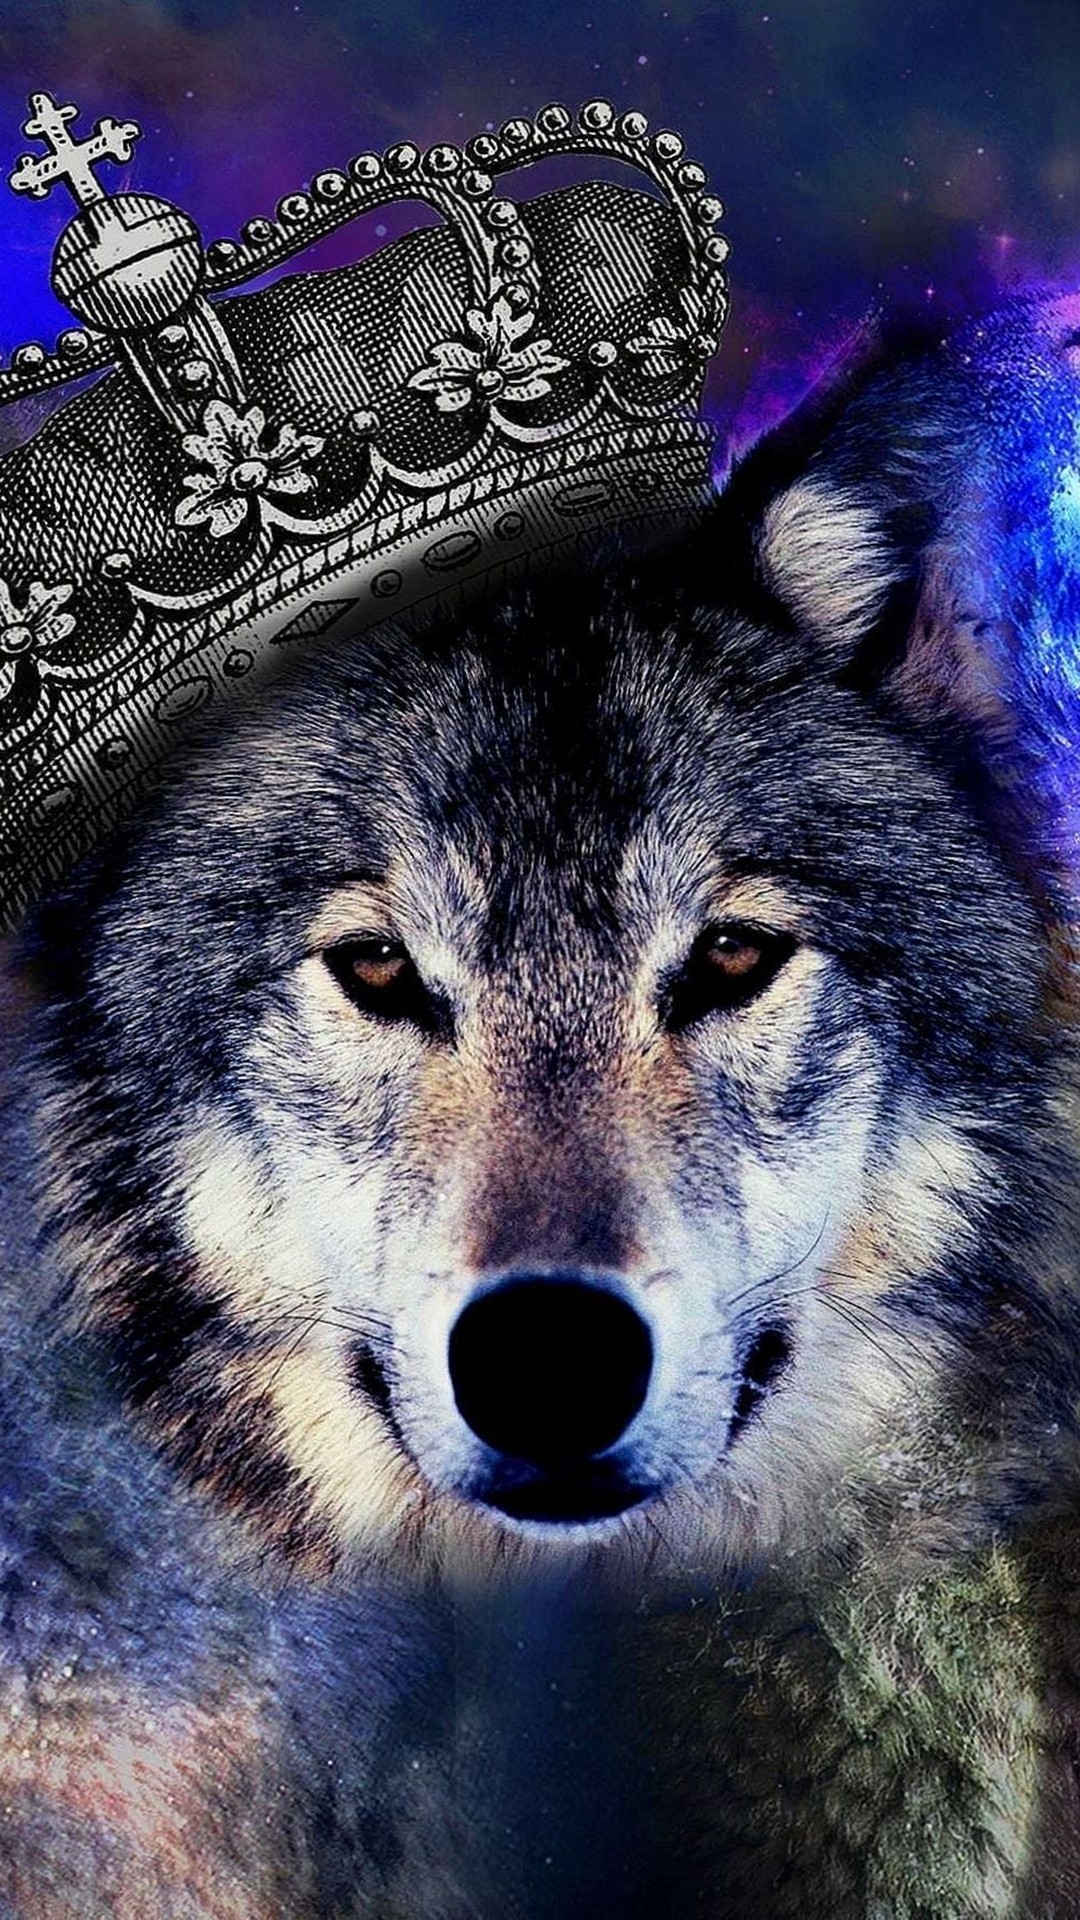 Cool Wolf iPhone Wallpaper Home Screen With high-resolution 1080X1920 pixel. You can set as wallpaper for Apple iPhone X, XS Max, XR, 8, 7, 6, SE, iPad. Enjoy and share your favorite HD wallpapers and background images